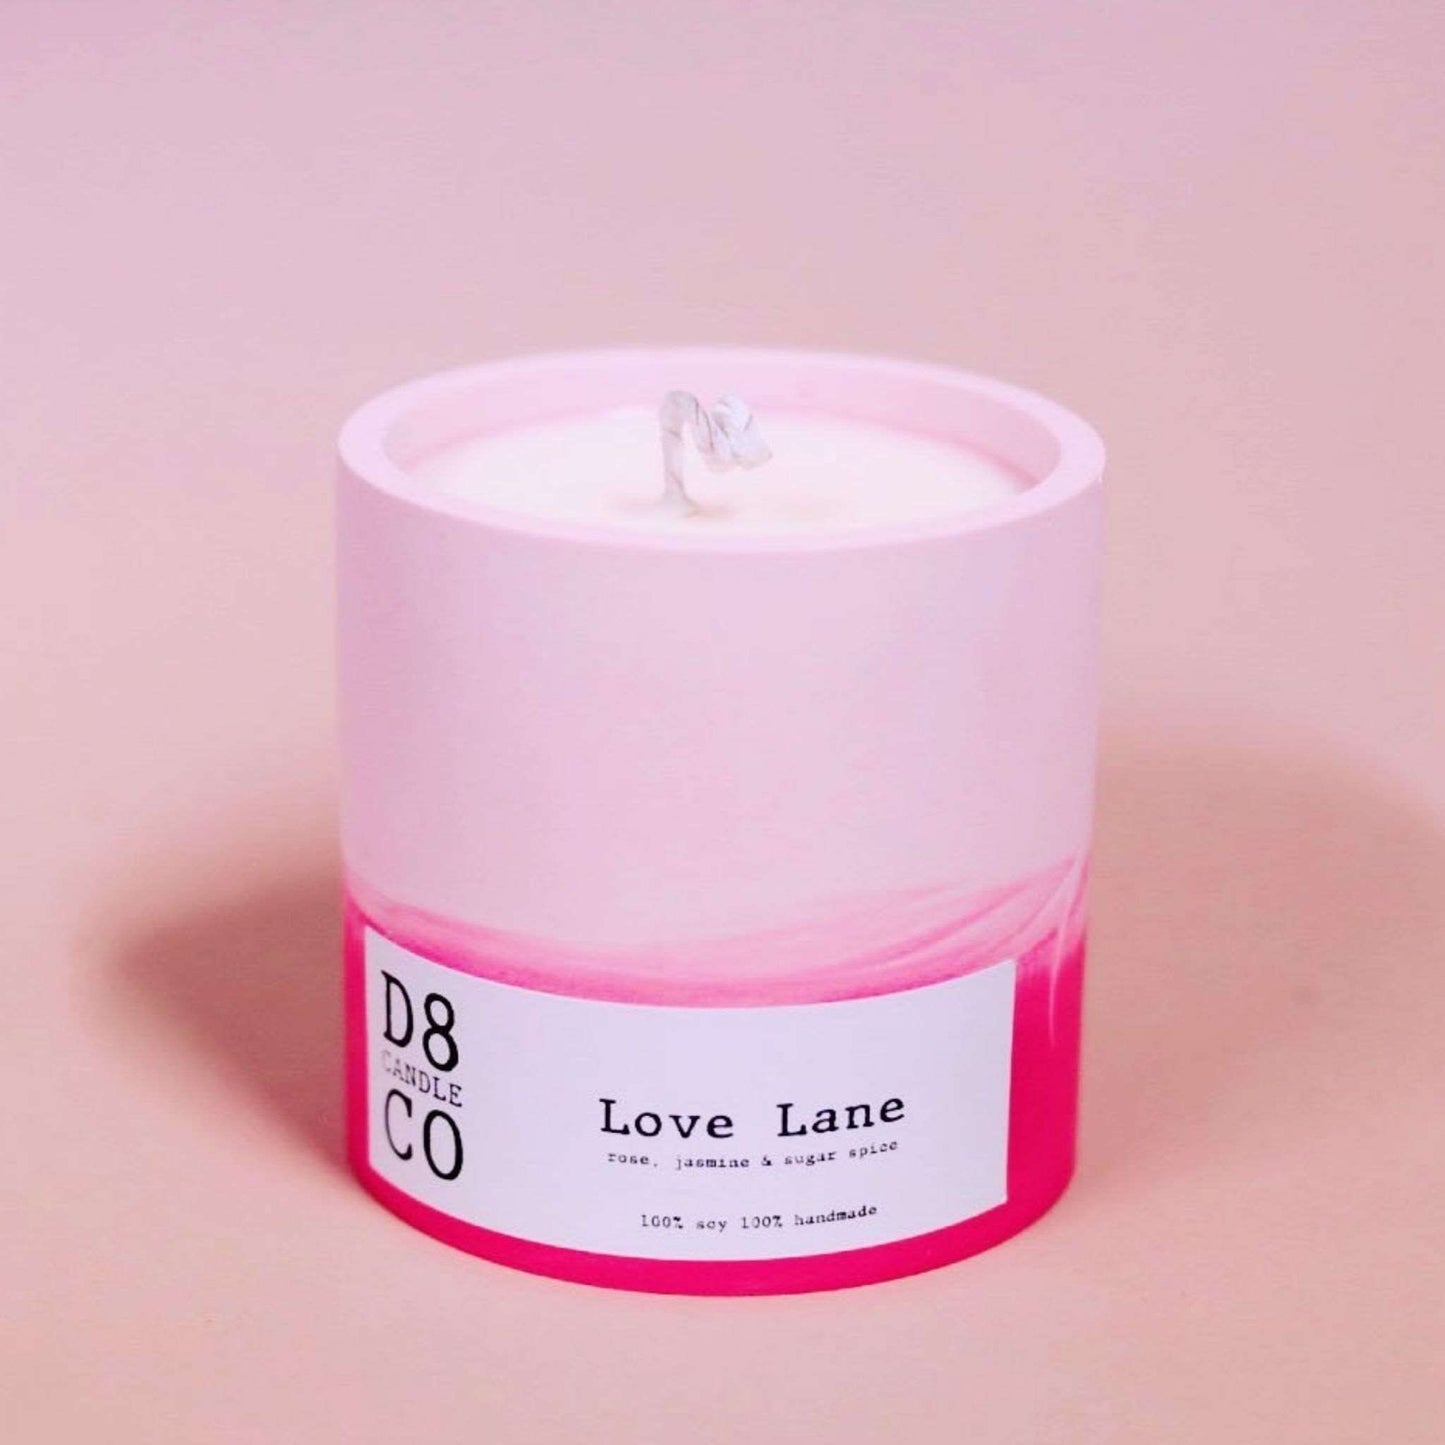 D8 Candle Co. Candles Love Lane Candle - D8 Candle Co.